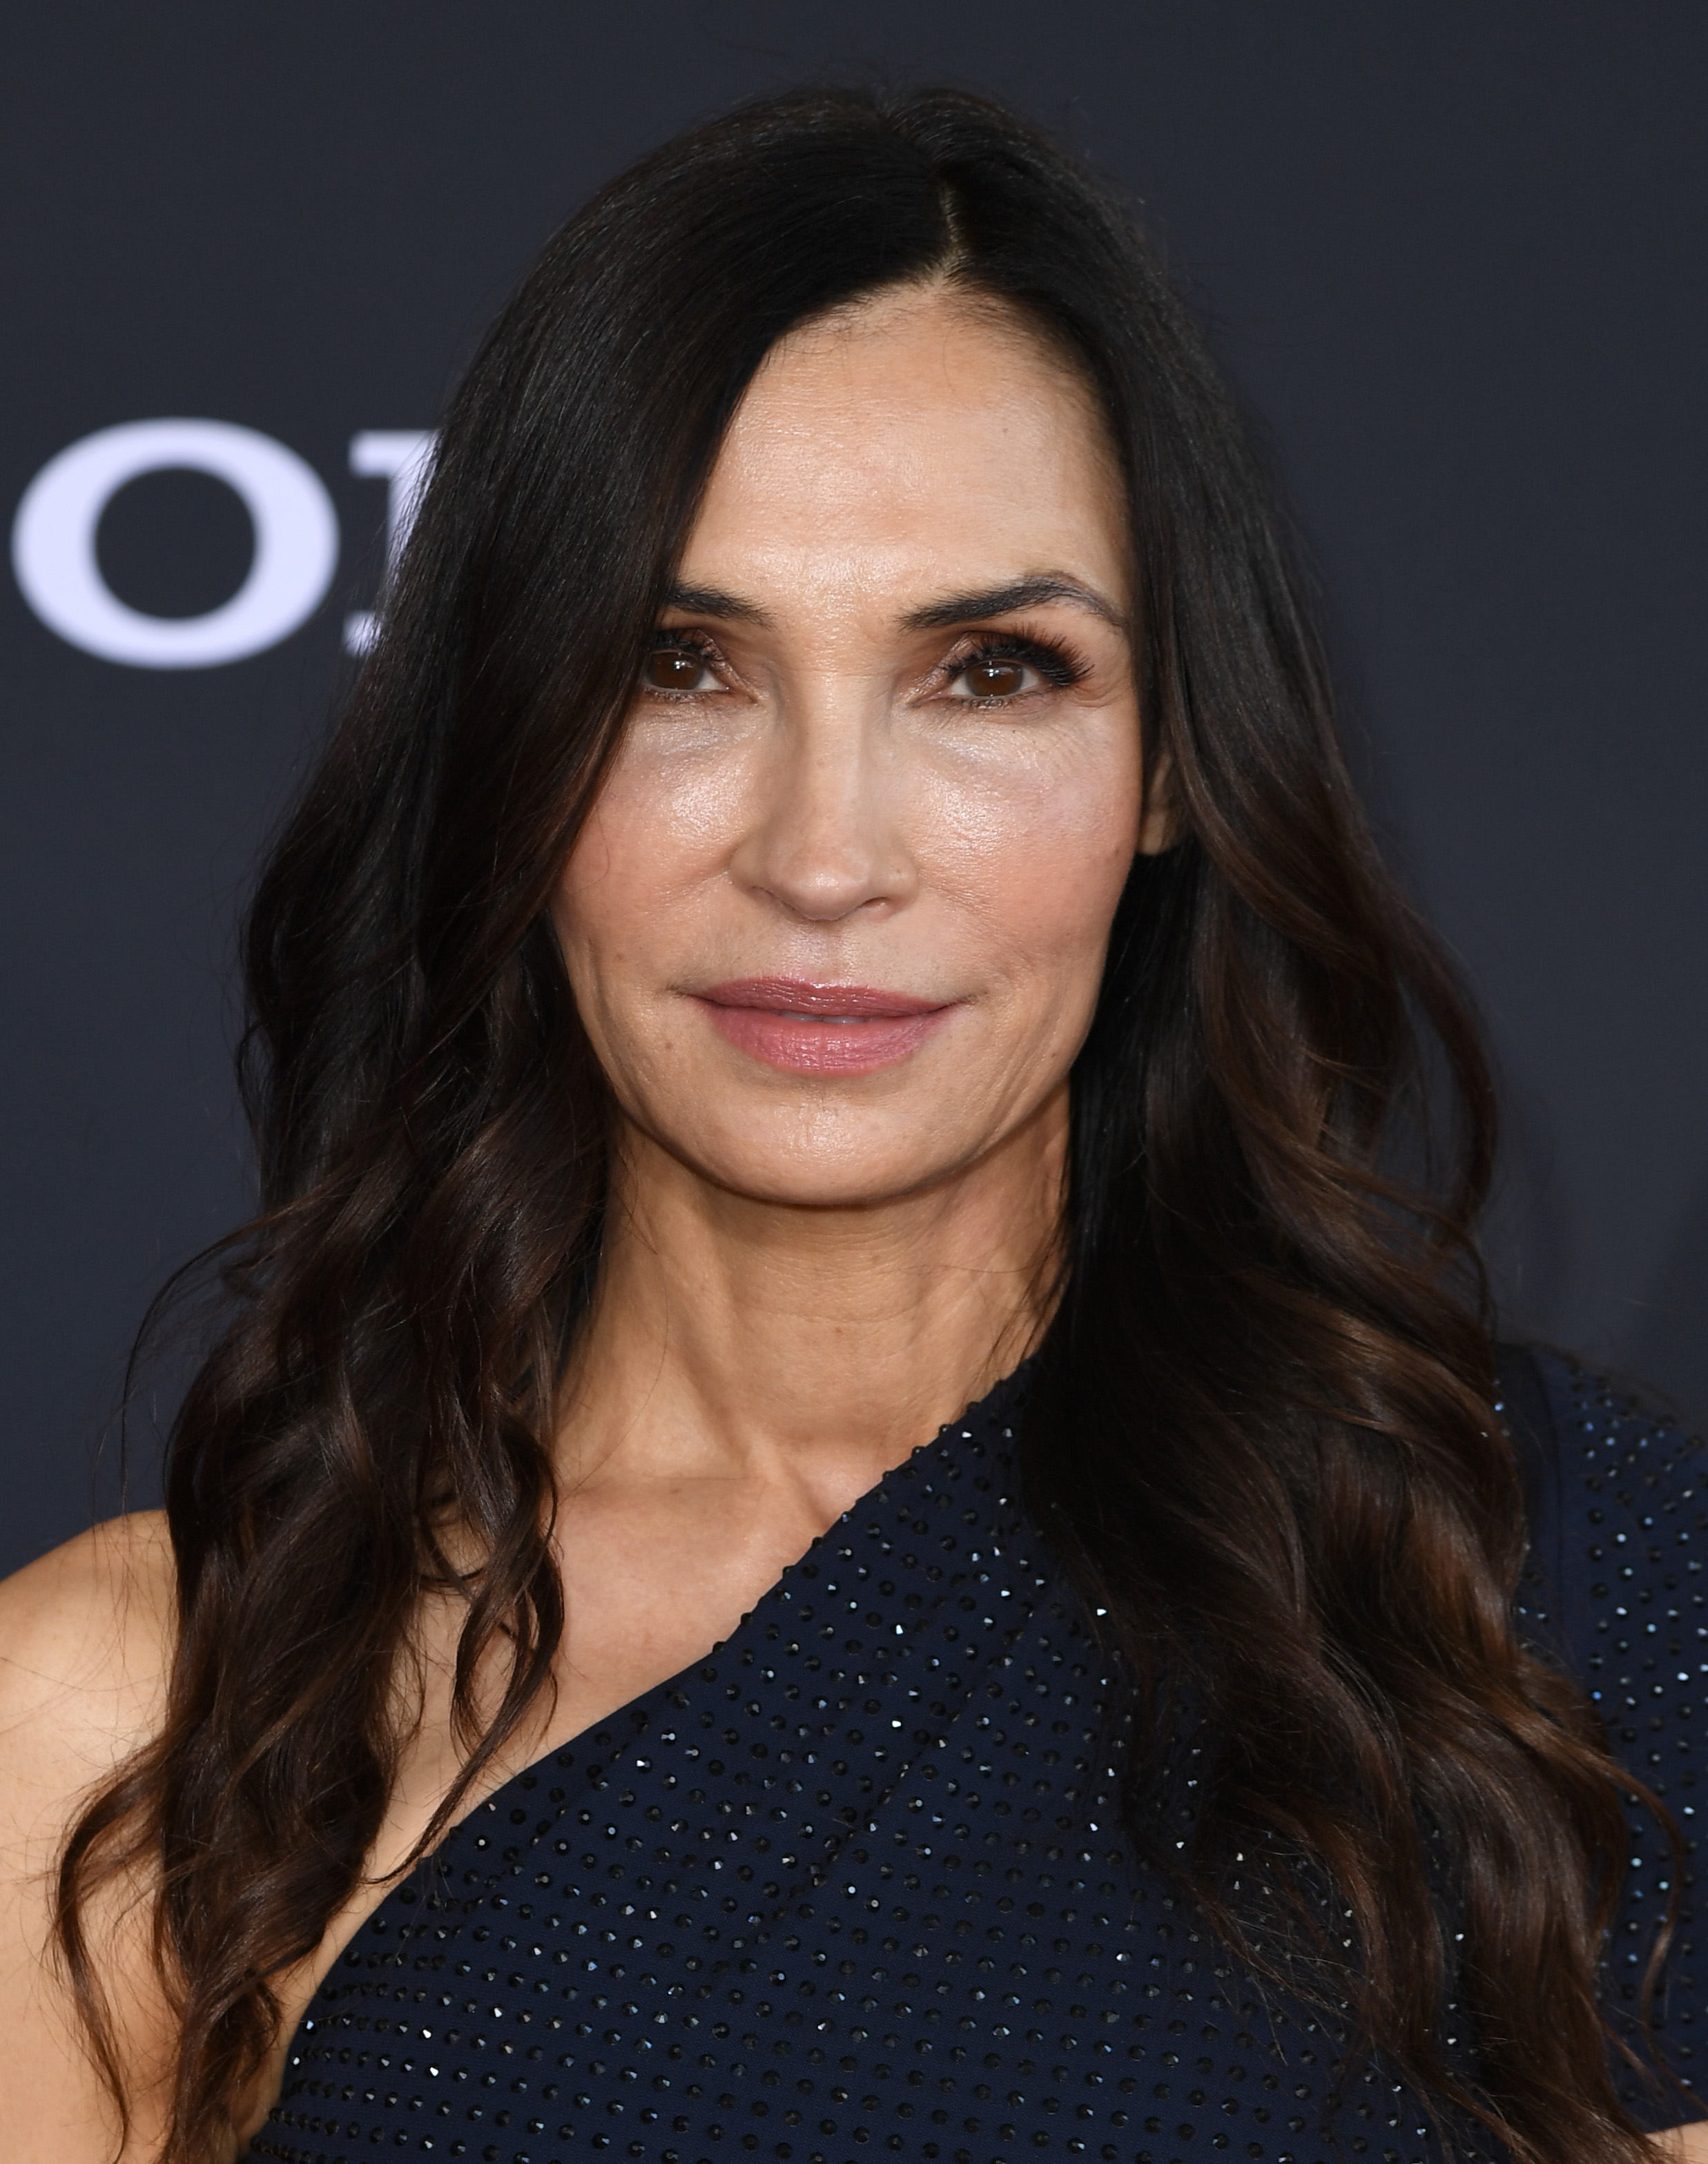 Famke Janssen poses at the Los Angeles premiere of Sony Pictures' "Knights Of The Zodiac" at Academy Museum of Motion Pictures on May 10, 2023, in Los Angeles, California | Source: Getty Images